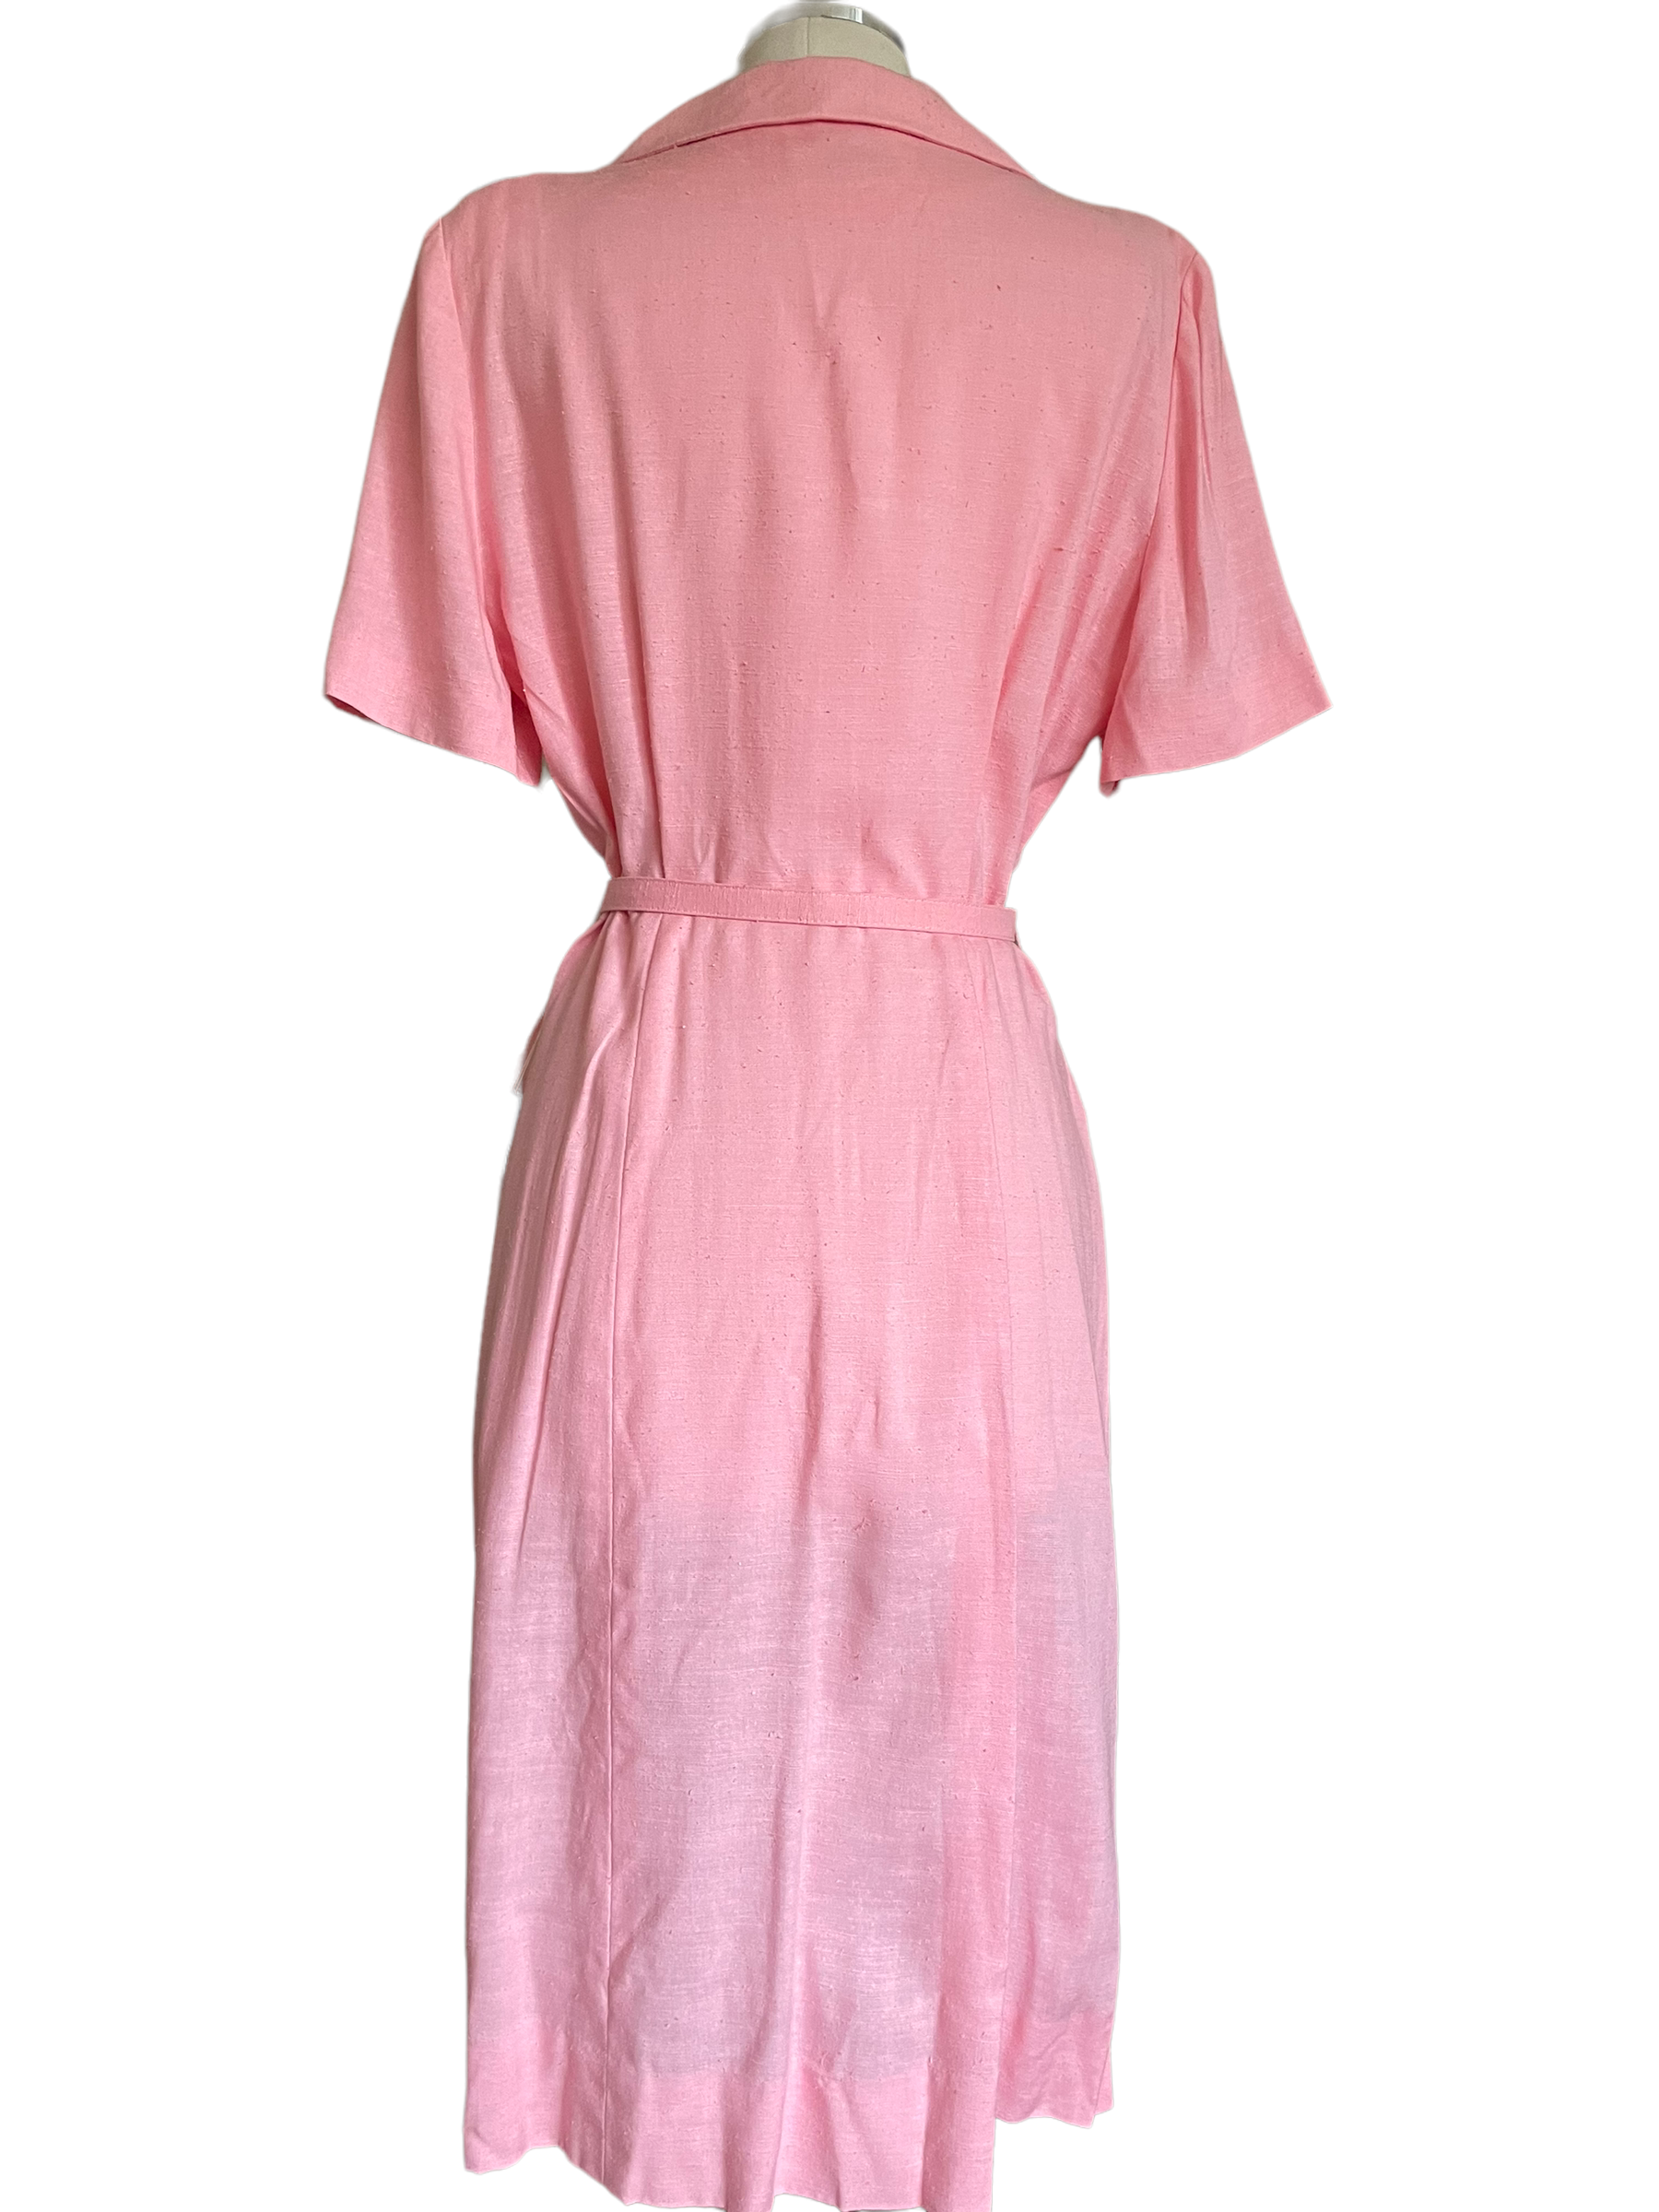 Vintage 1950s Deadstock Lordleigh Light Pink Silk and Rayon Dress SZ M |  Barn Owl Vintage | Seattle Vintage Dresses Full back view.